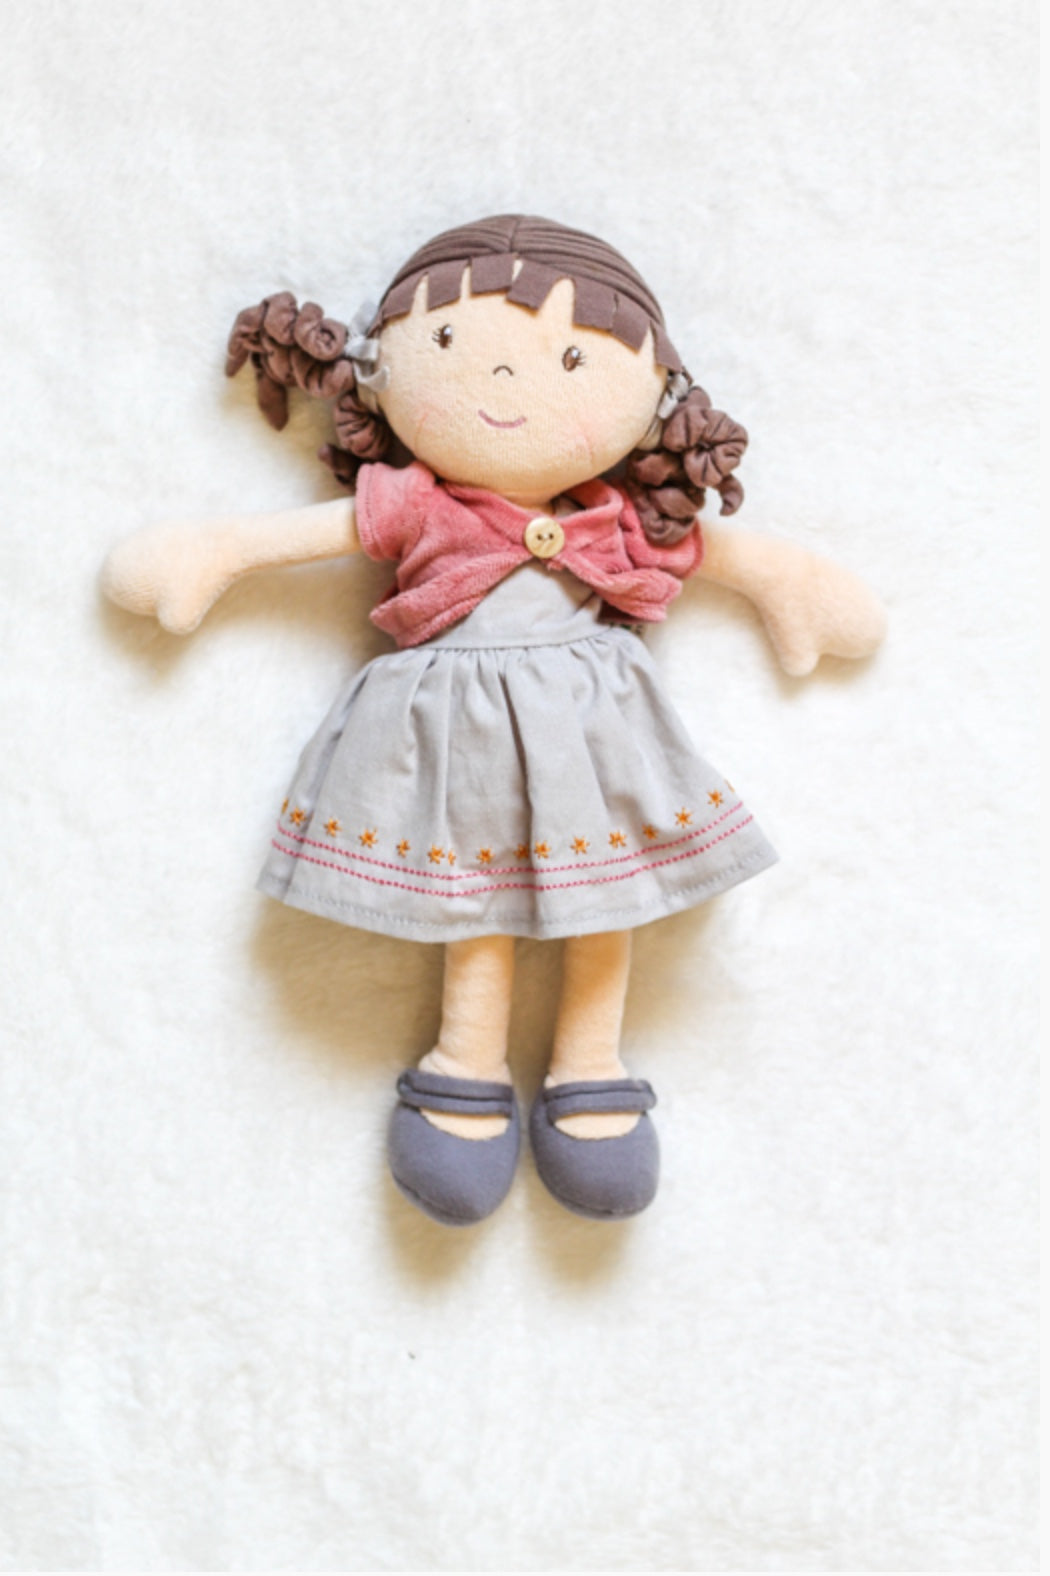 Organic Rose Doll with Brown Hair